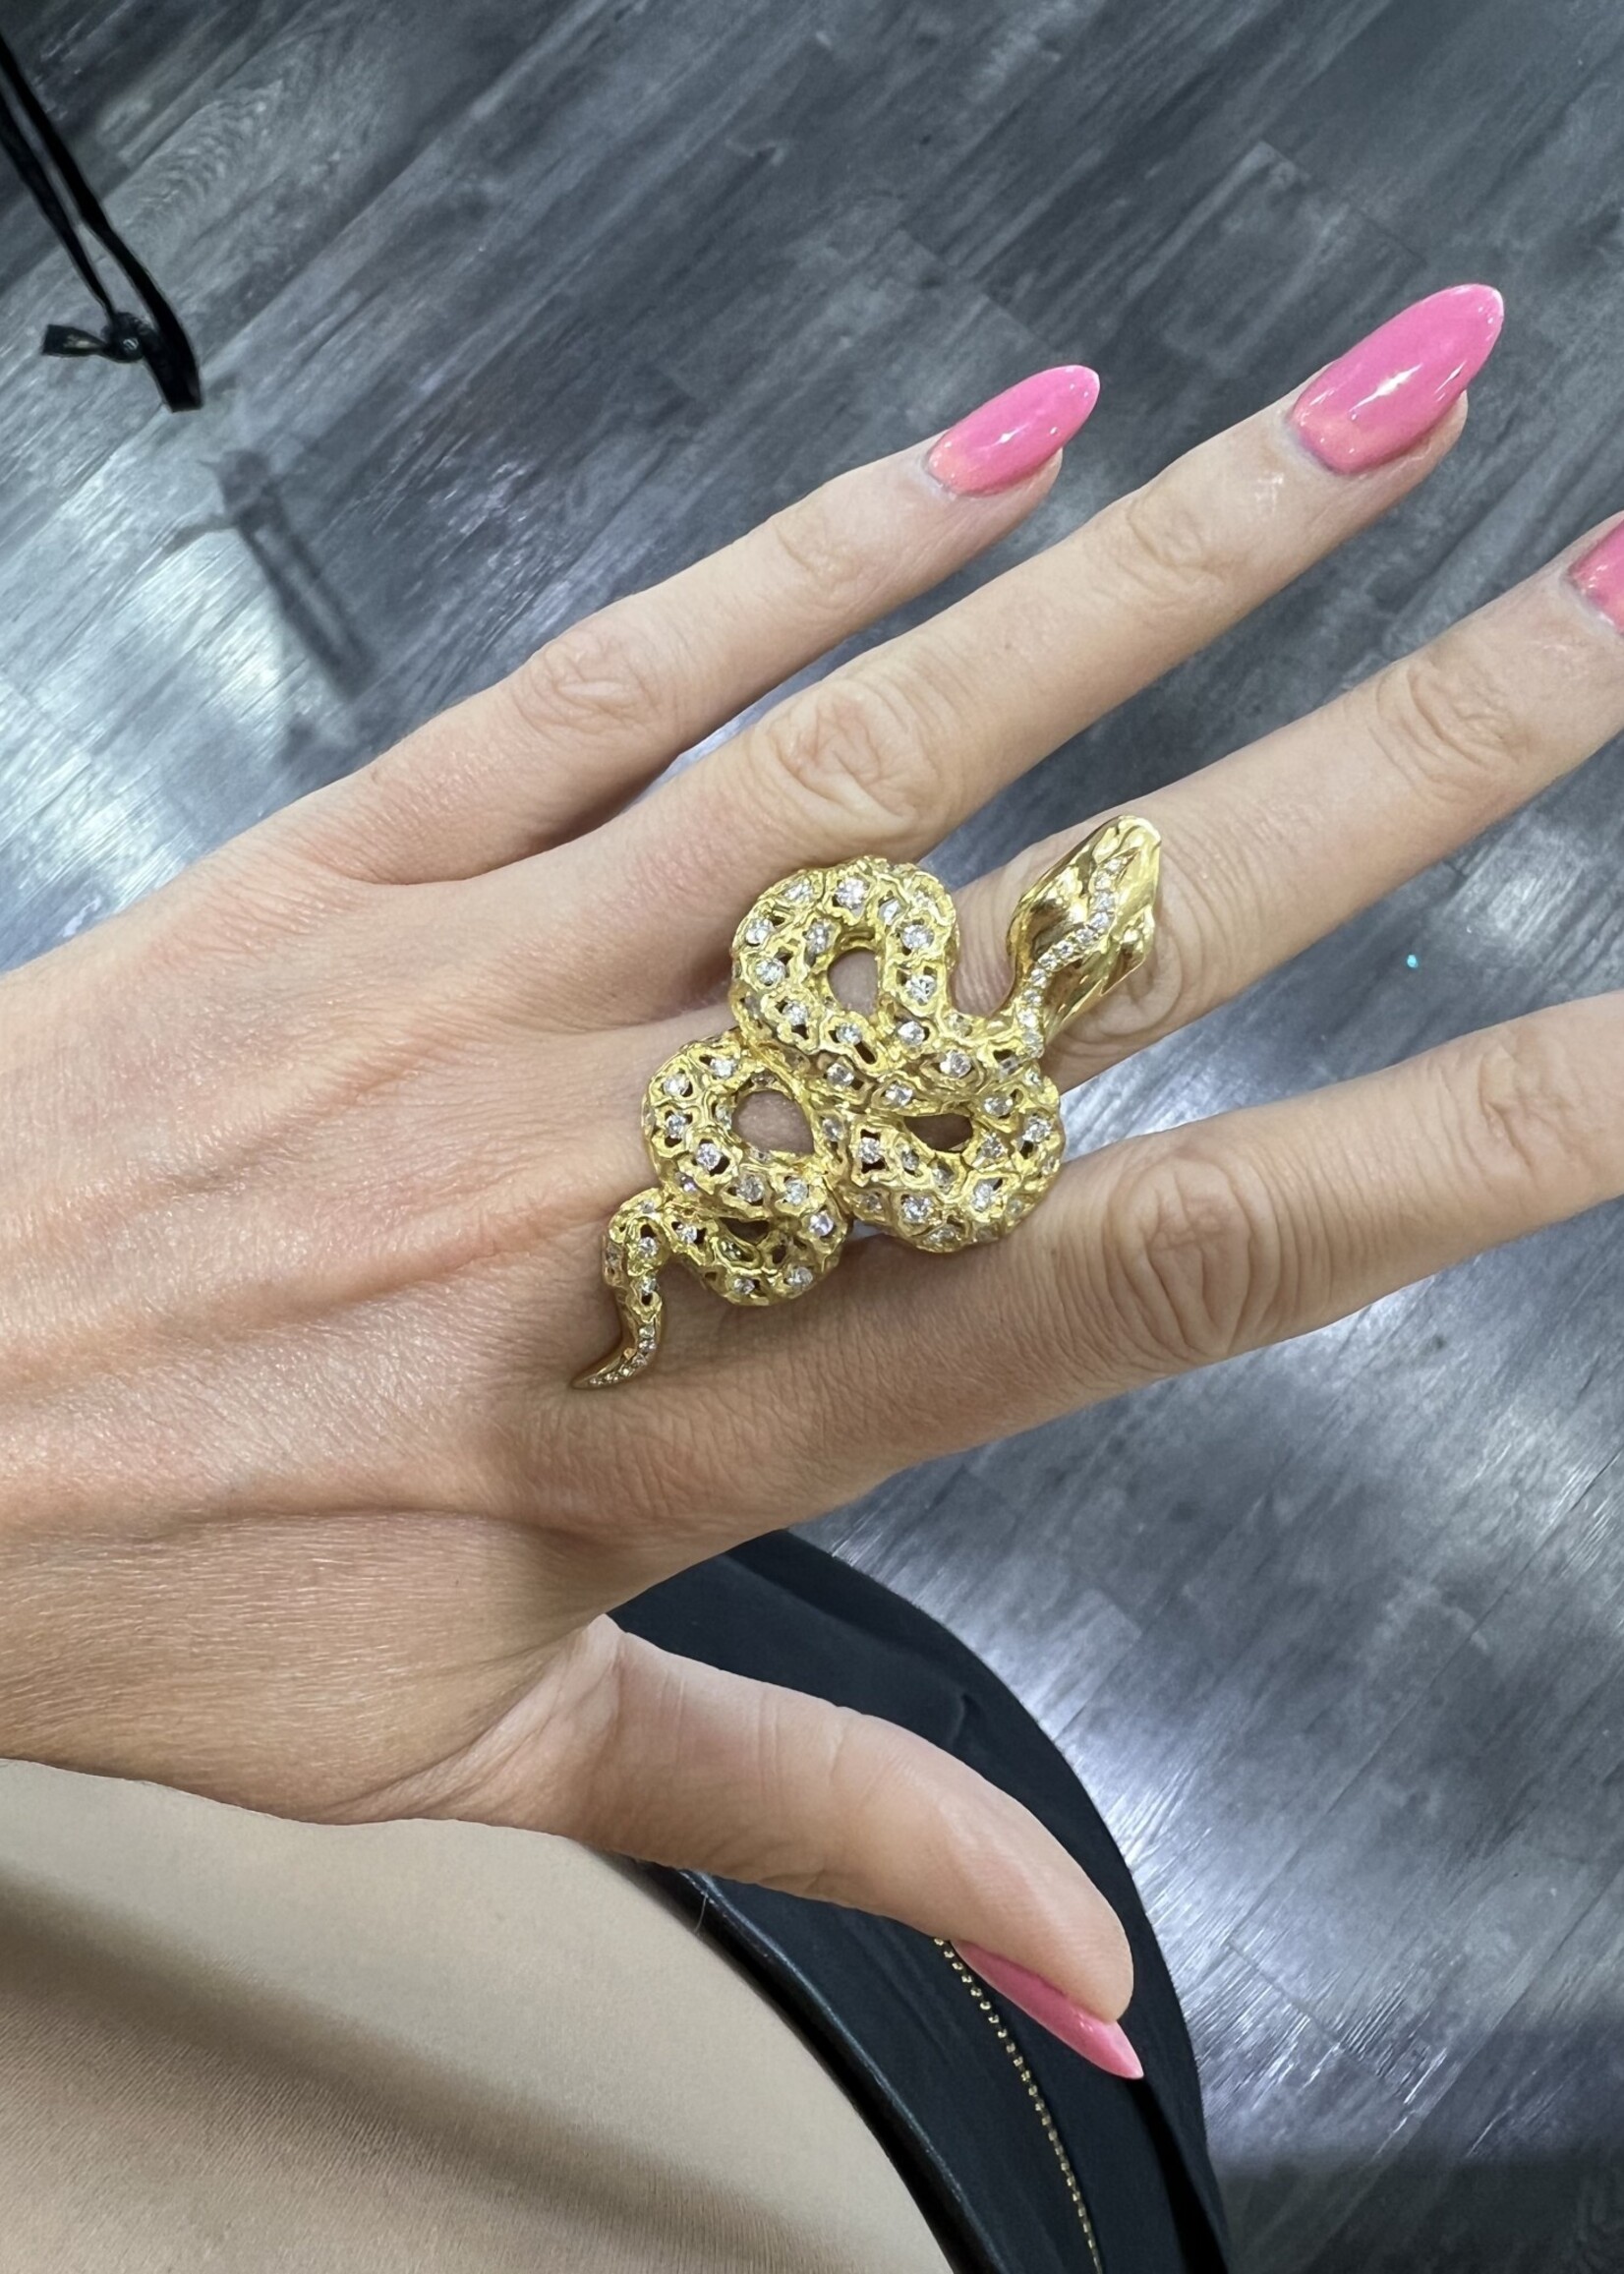 18k Snake Ring with 4.3 carats of Diamonds. Made in Israel.